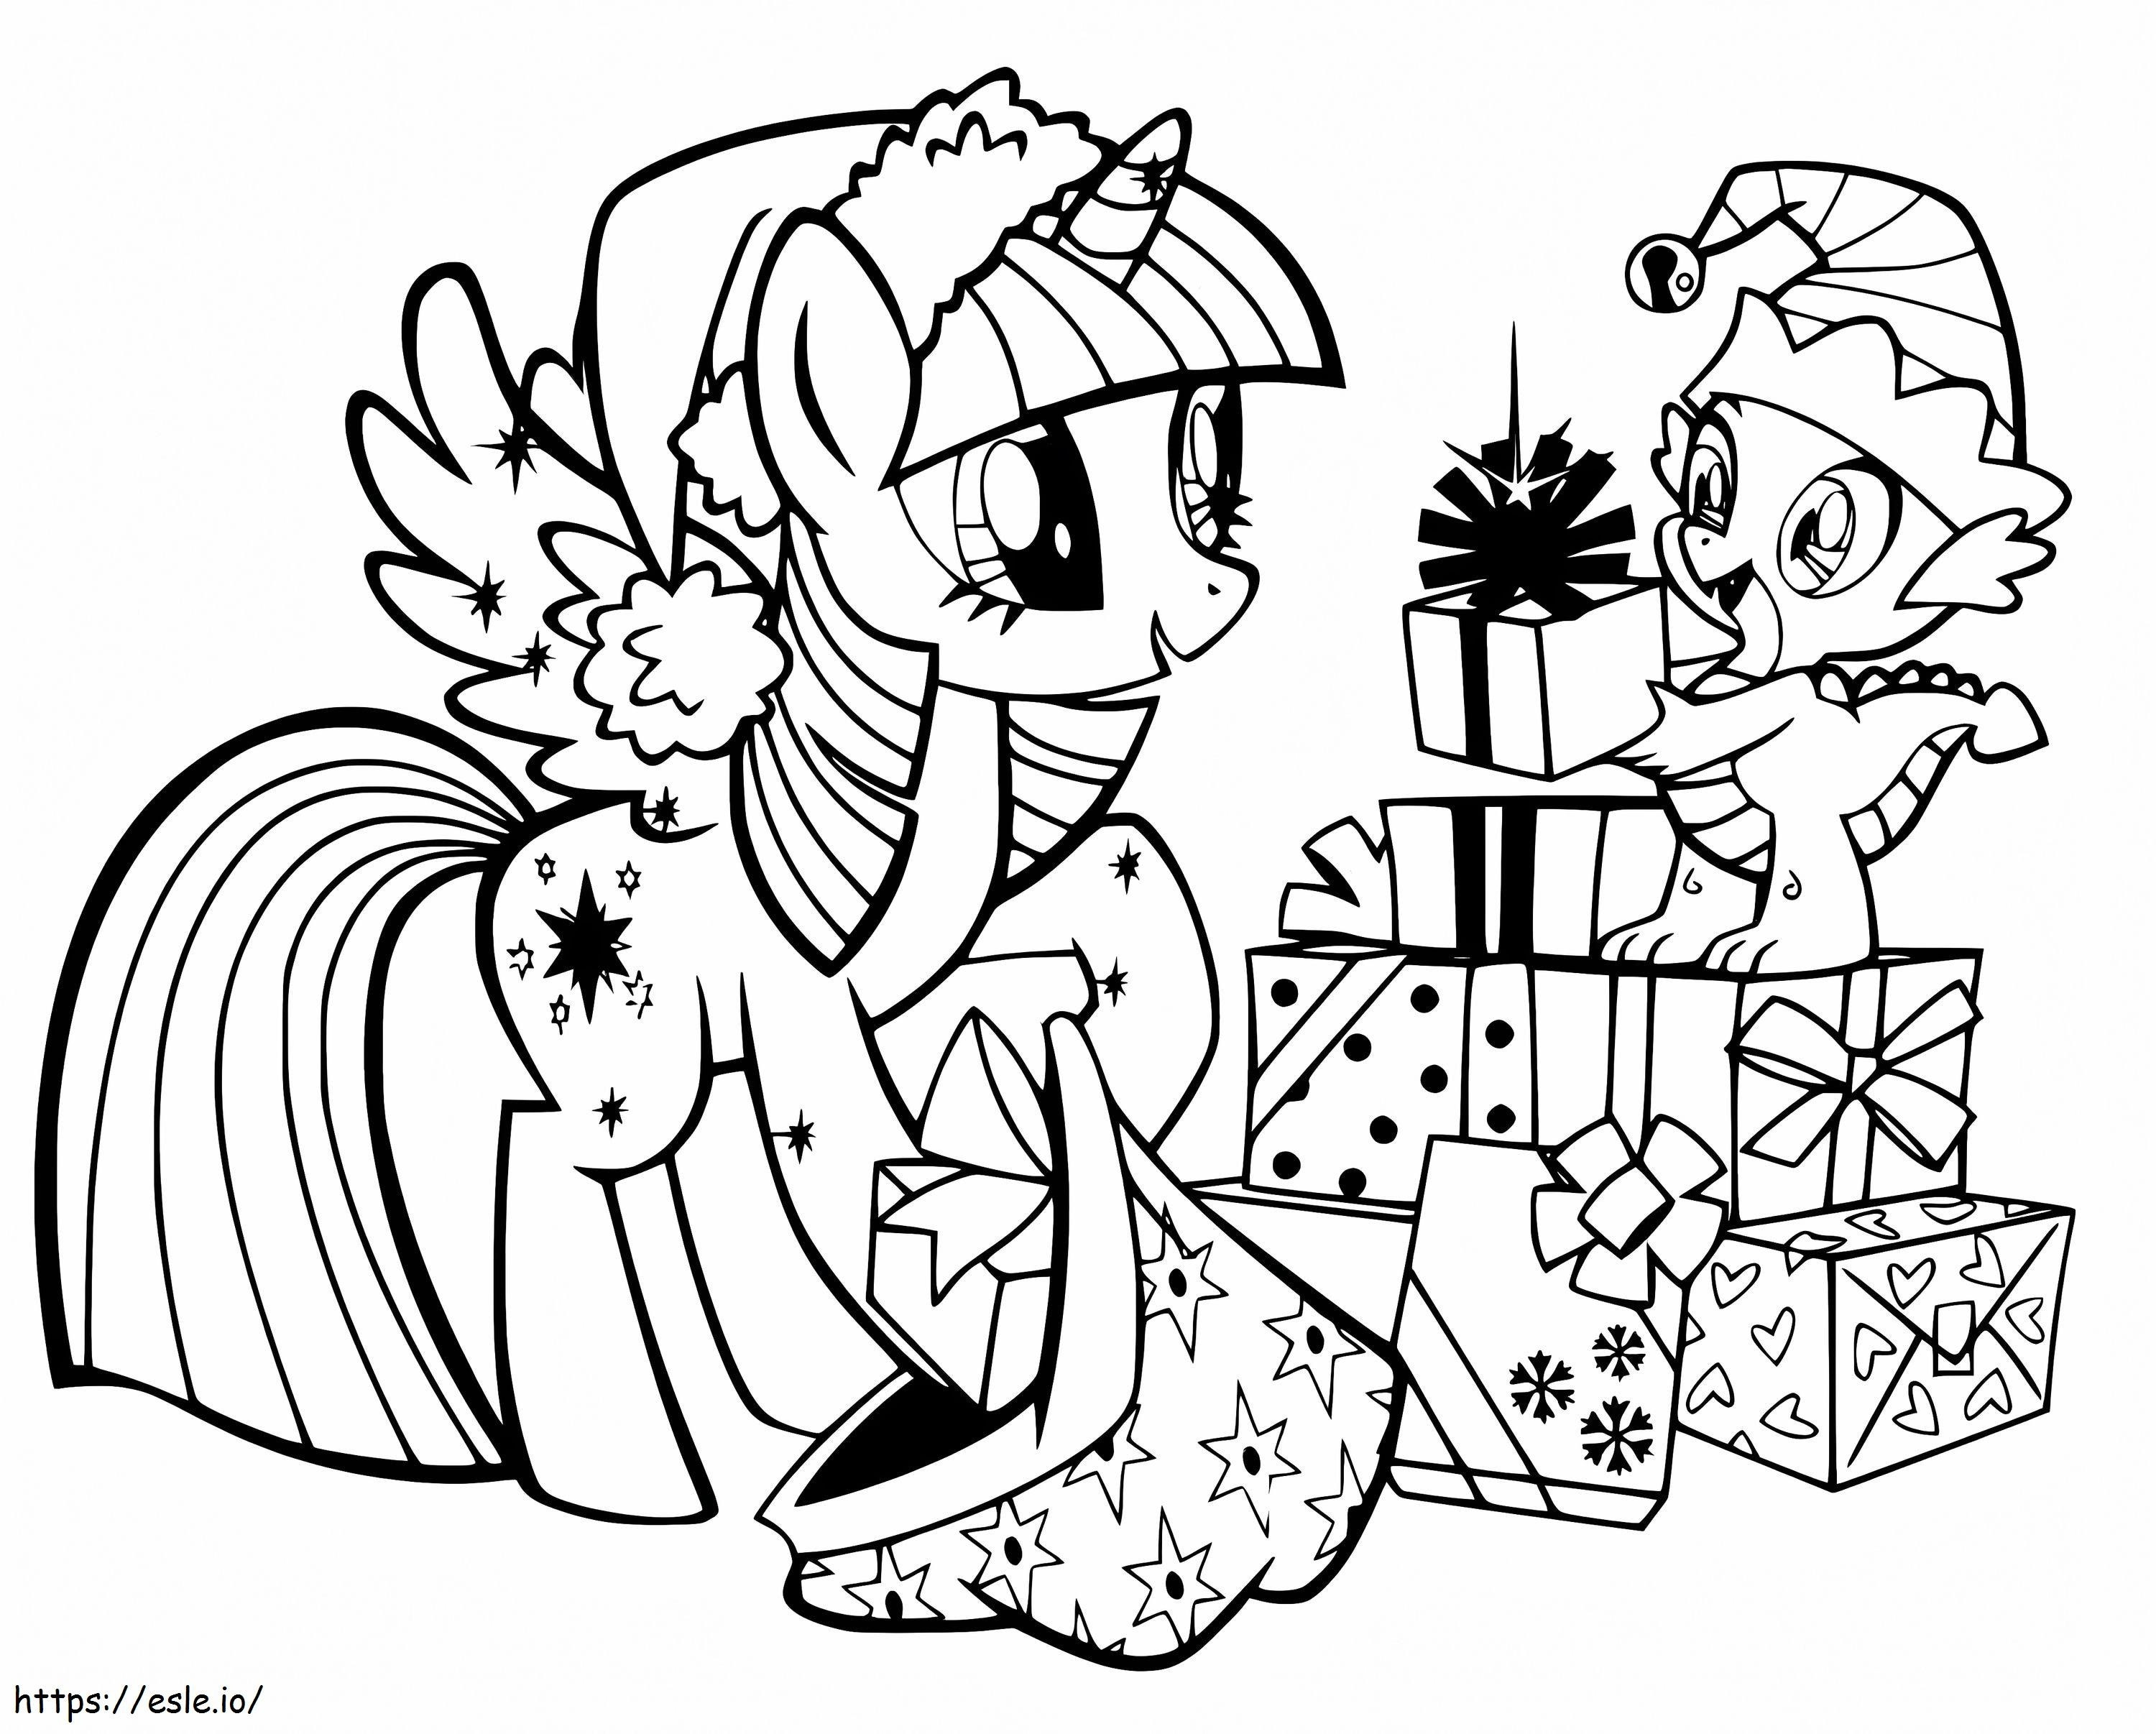 Twilight Sparkle On Christmas coloring page